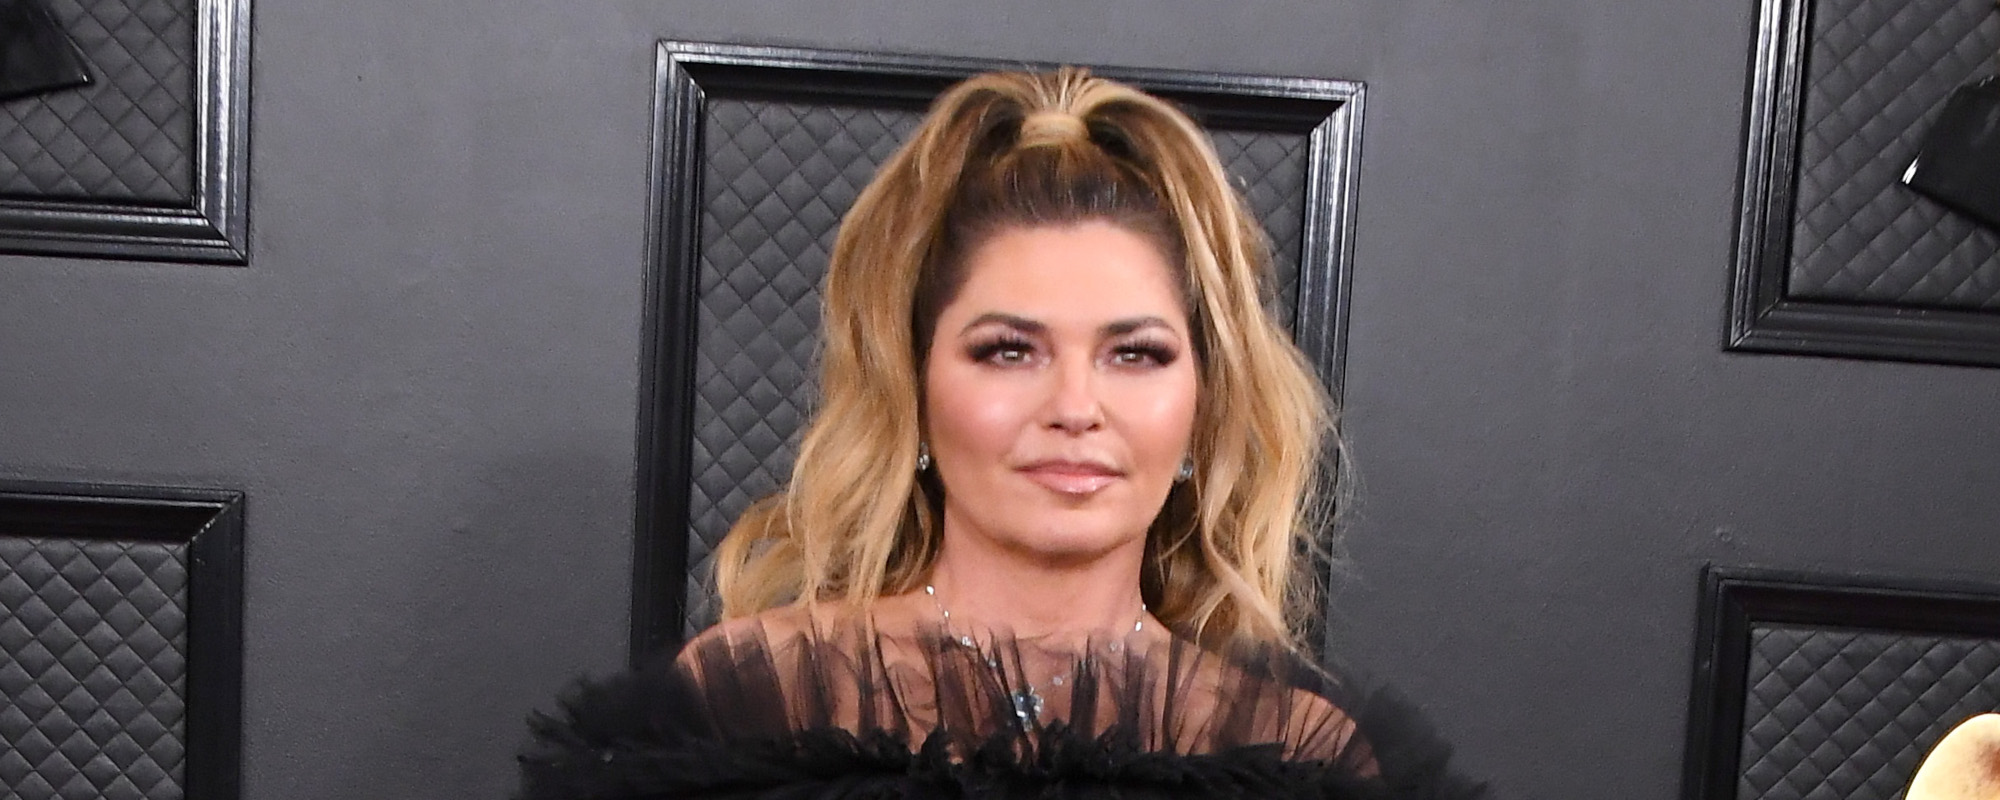 Shania Twain Launches Queen of Me Tour